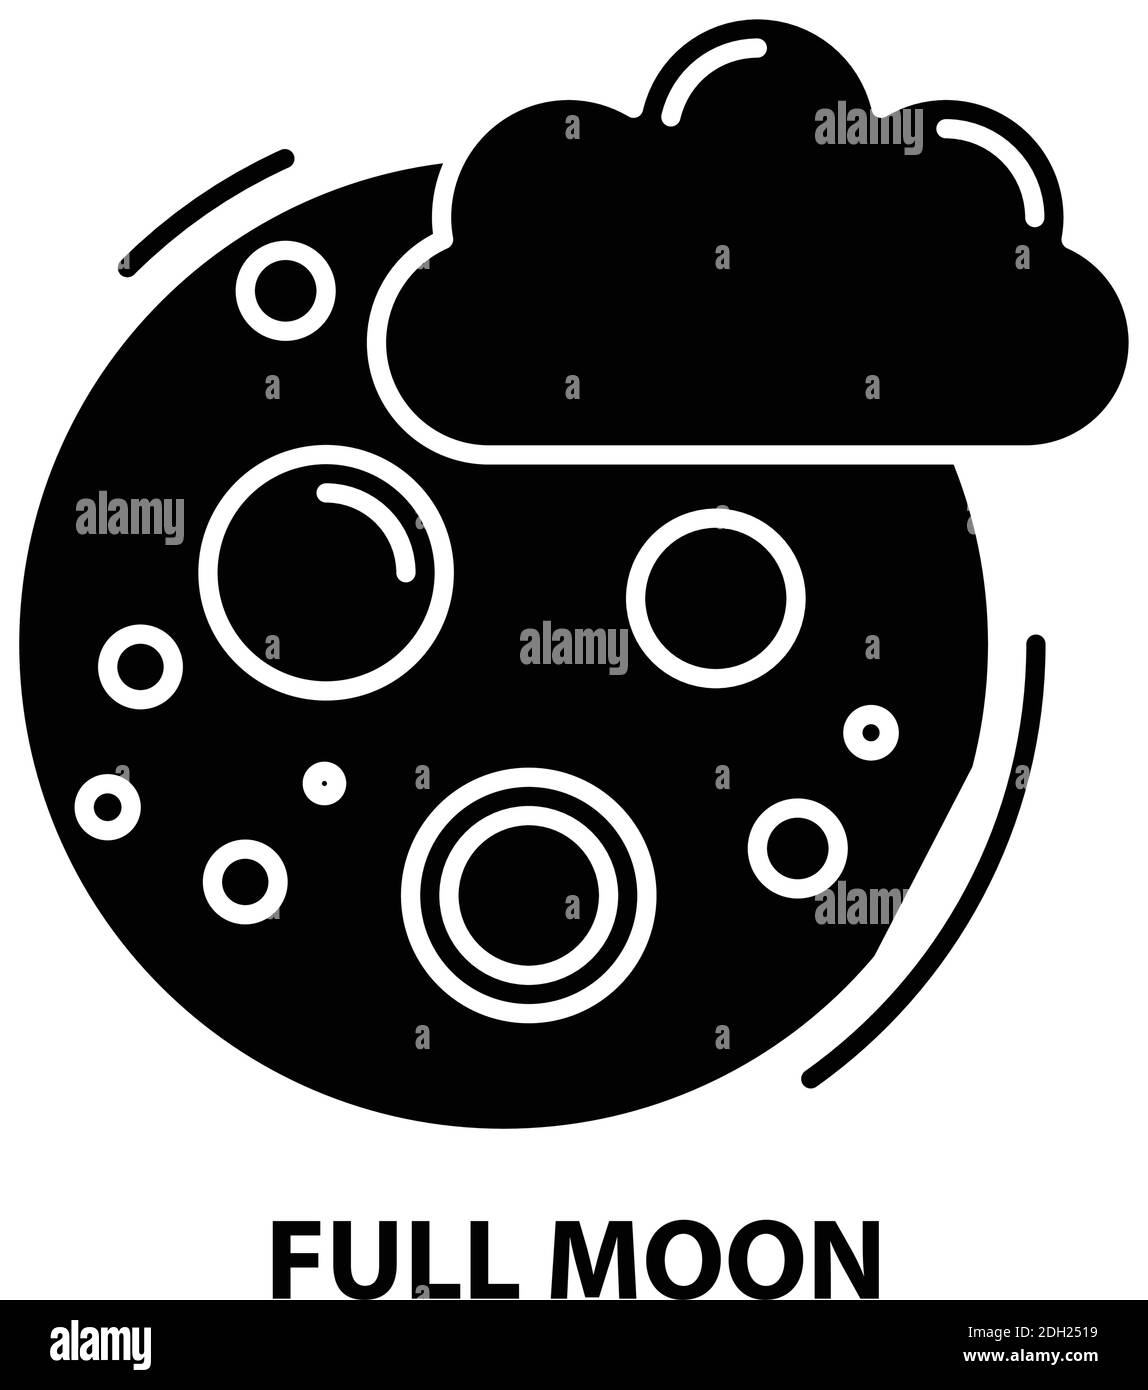 full moon icon, black vector sign with editable strokes, concept illustration Stock Vector